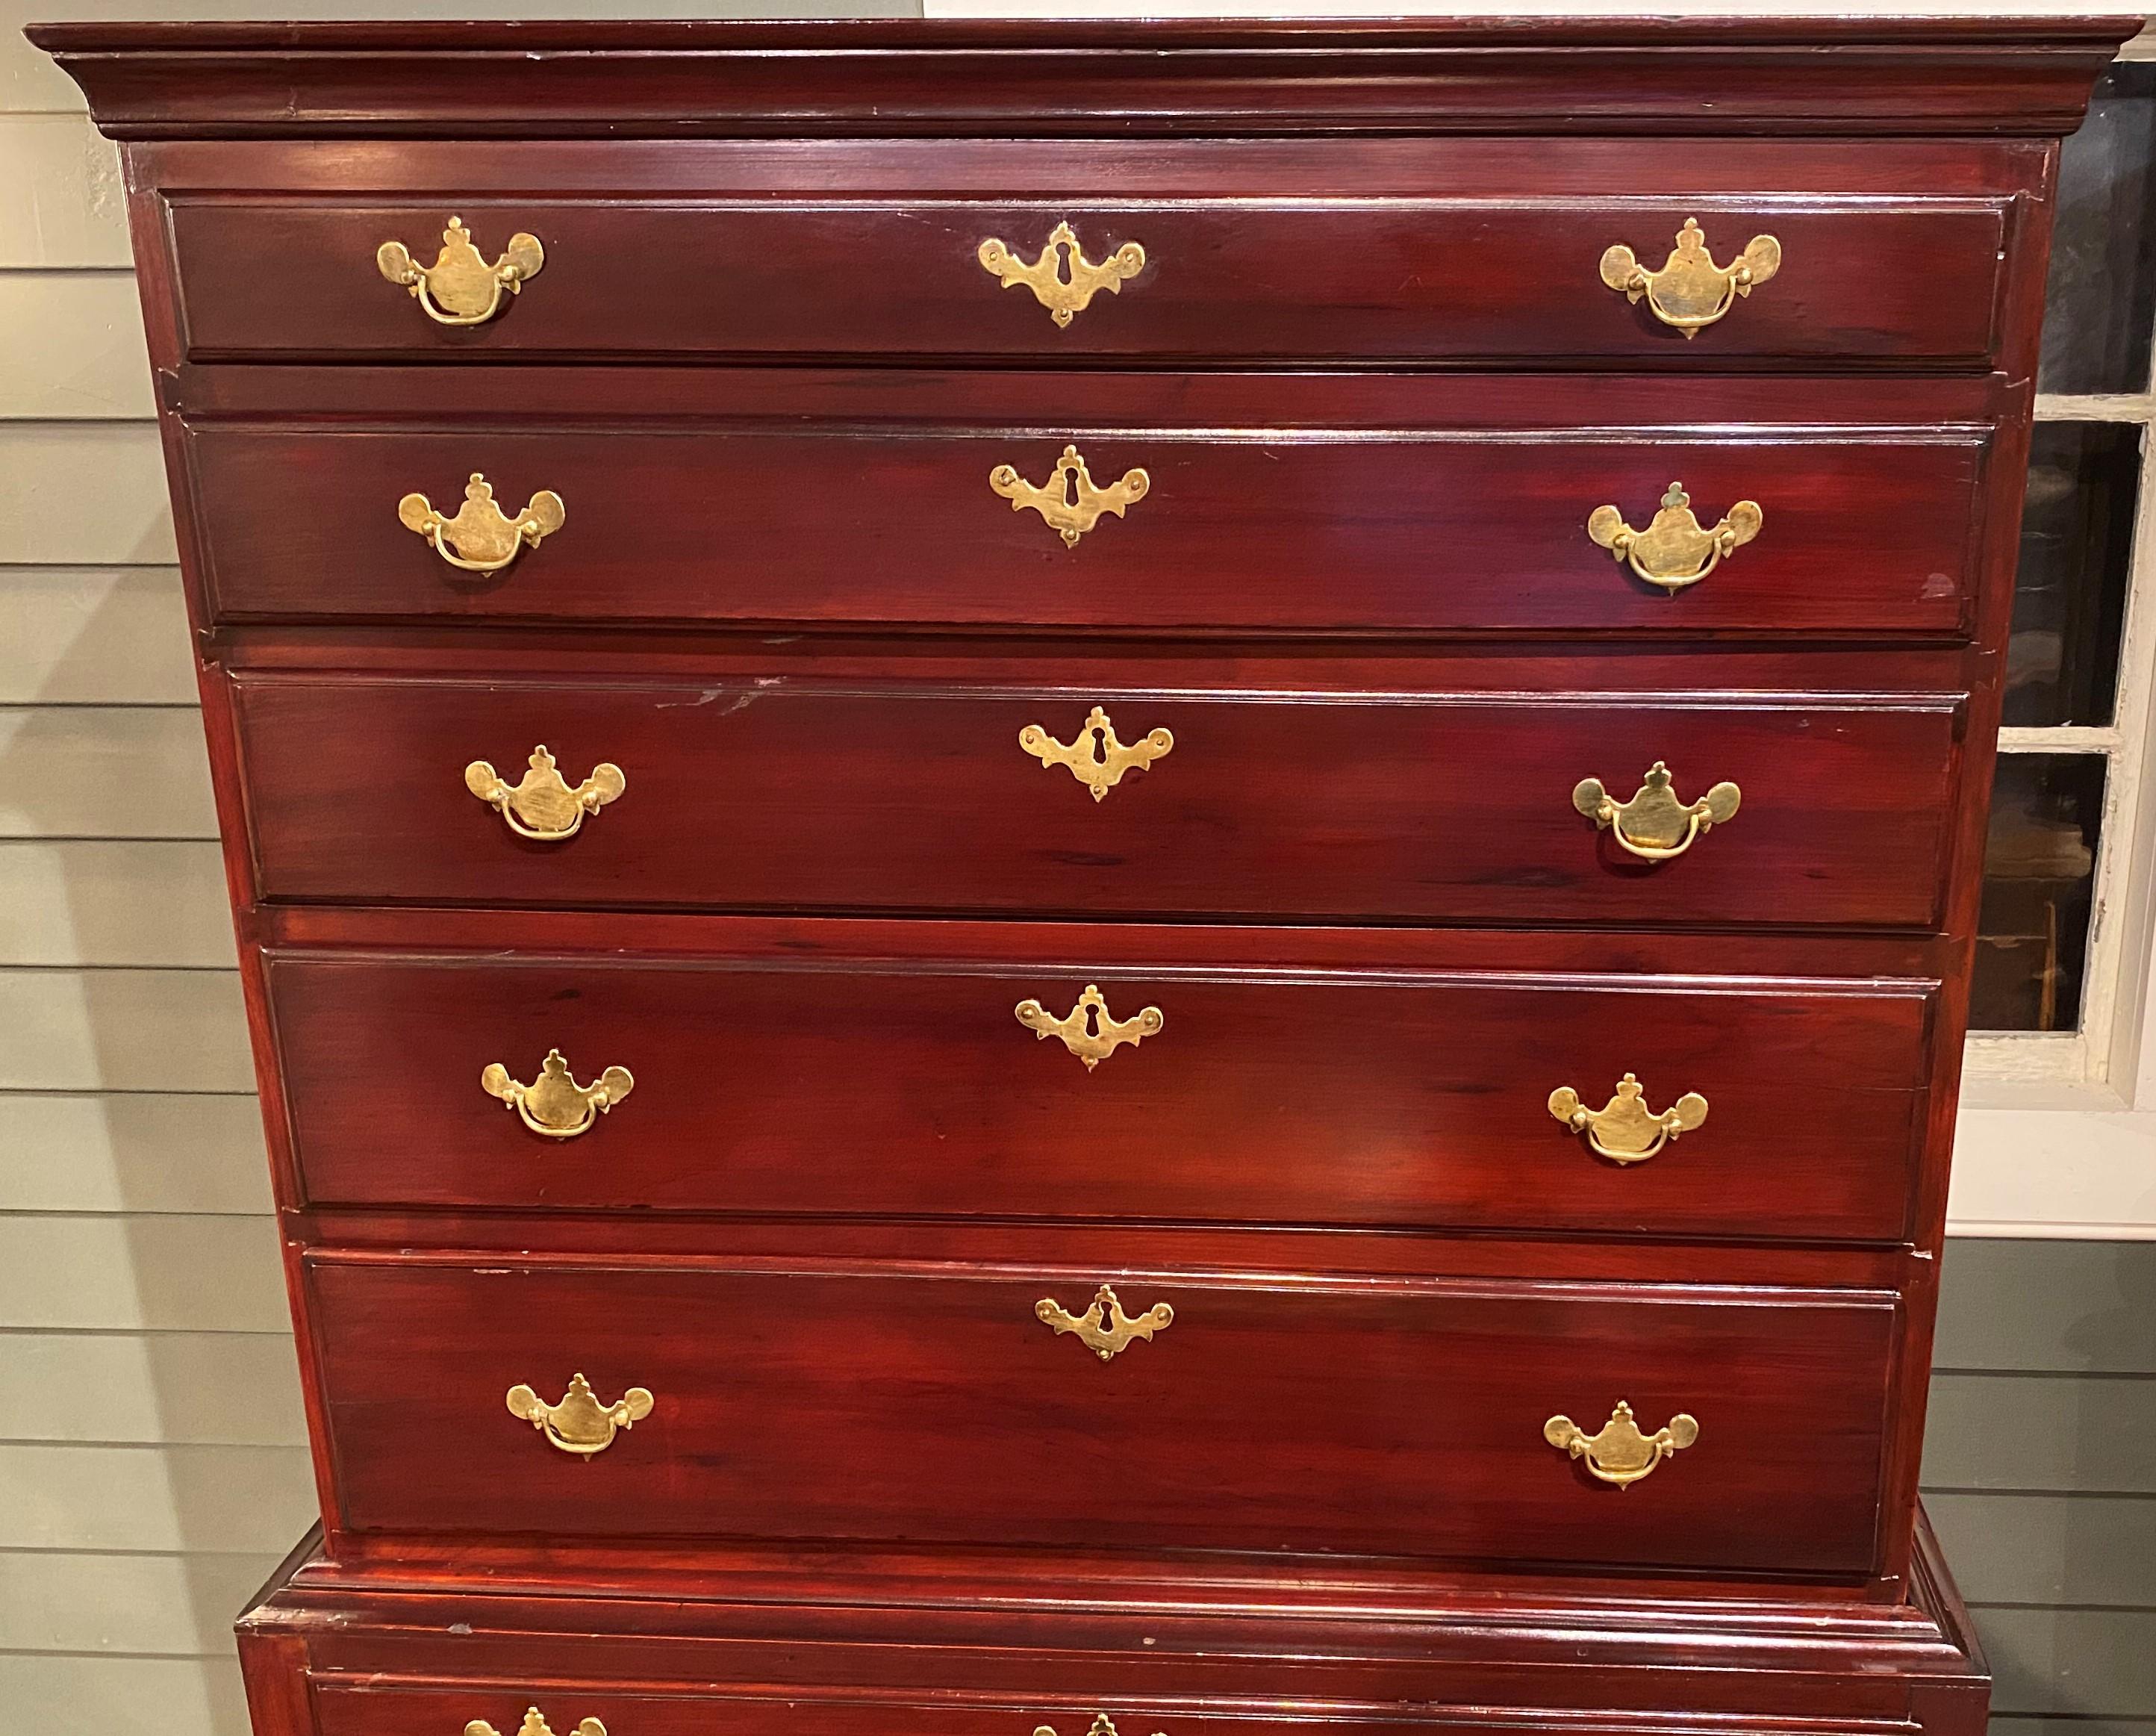 A beautiful Queen Anne cherry wood two part highboy with a mahoganized finish, with a molded cornice surmounting an upper case with five graduated drawers, over a lower case with a single long drawer over three fitted drawers, the central of which